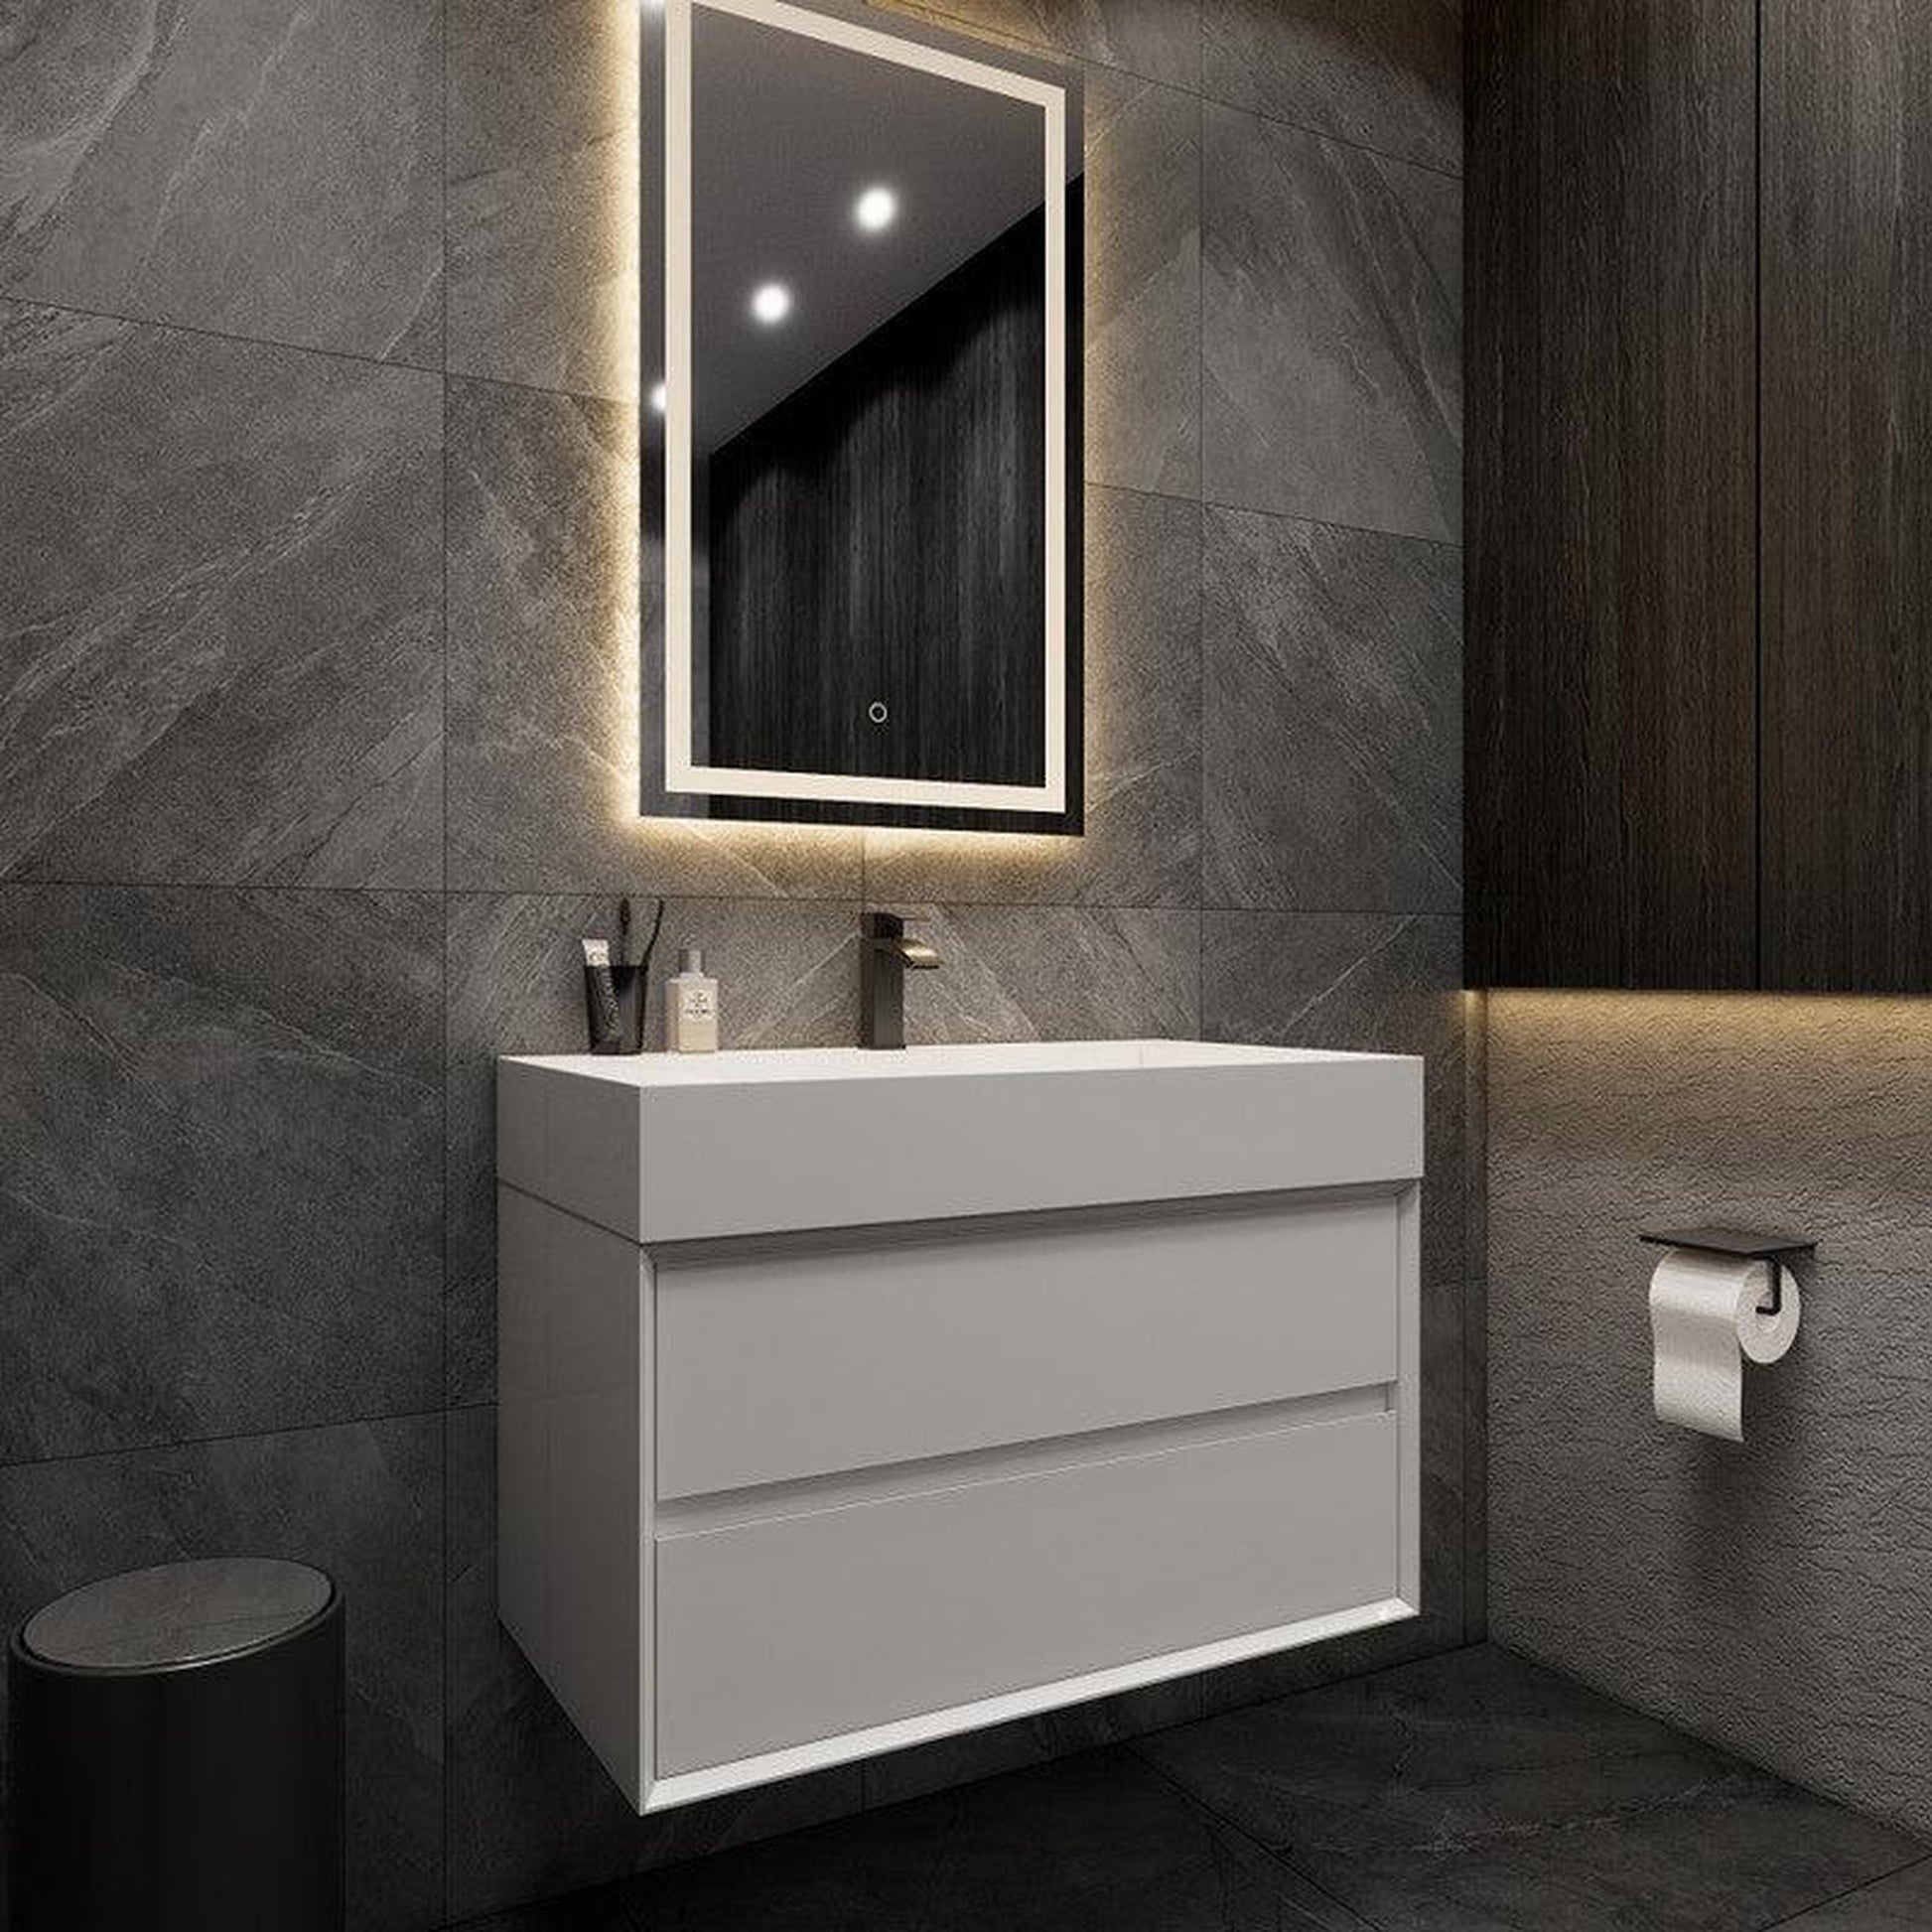 Moreno Bath MAX 36" Gloss White Wall-Mounted Vanity With Single Reinforced White Acrylic Sink